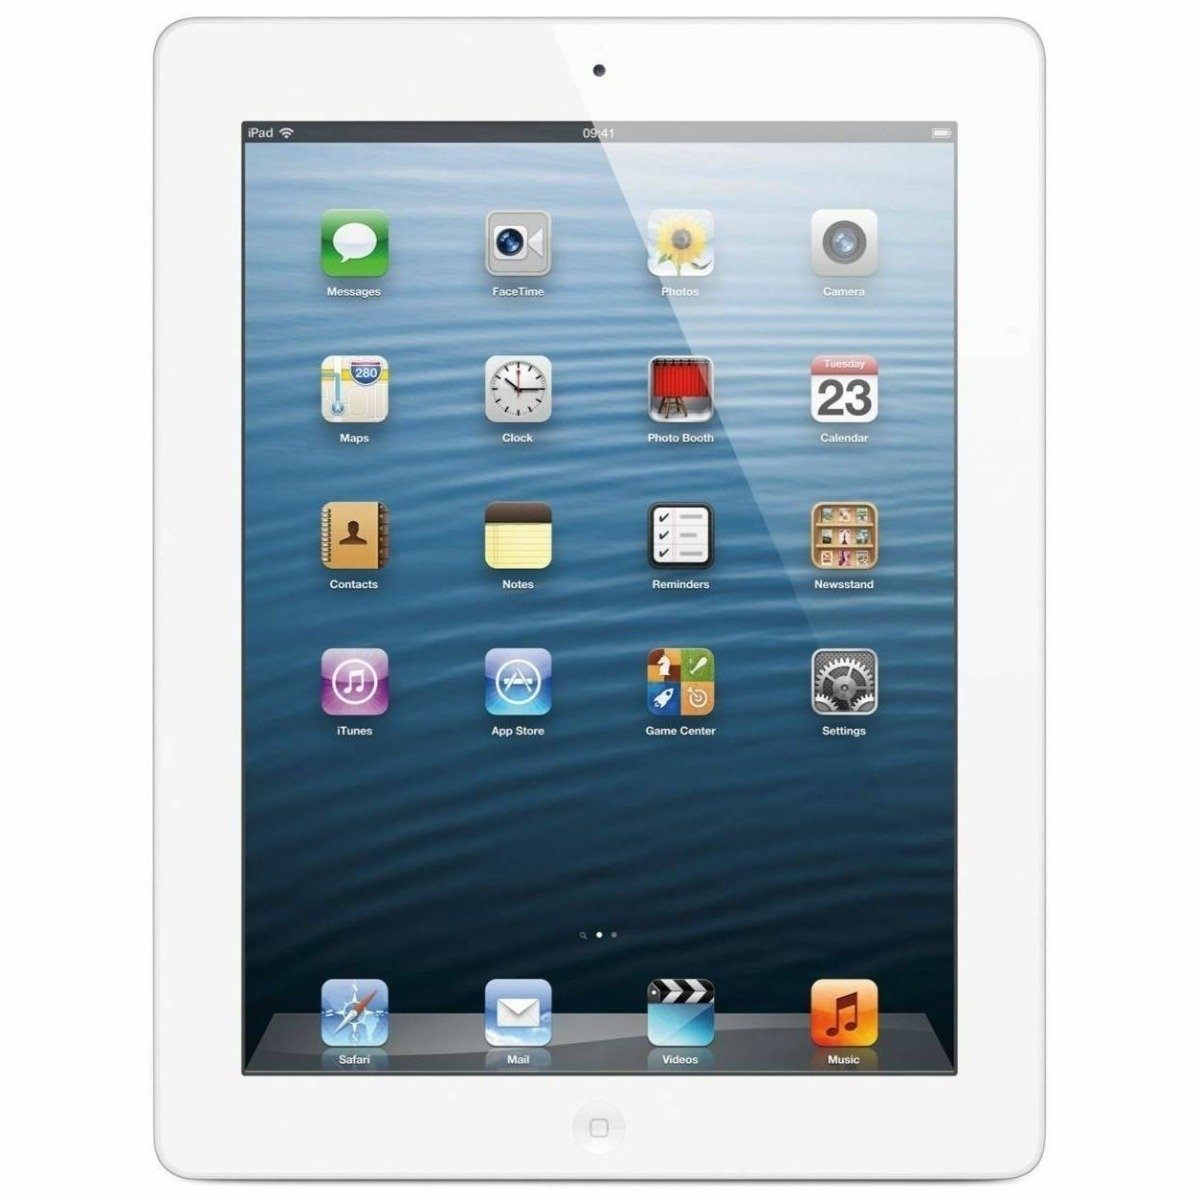 Apple iPad 2 WiFi + 3G Factory Unlocked - Assorted Colors and Sizes / White / 16GB